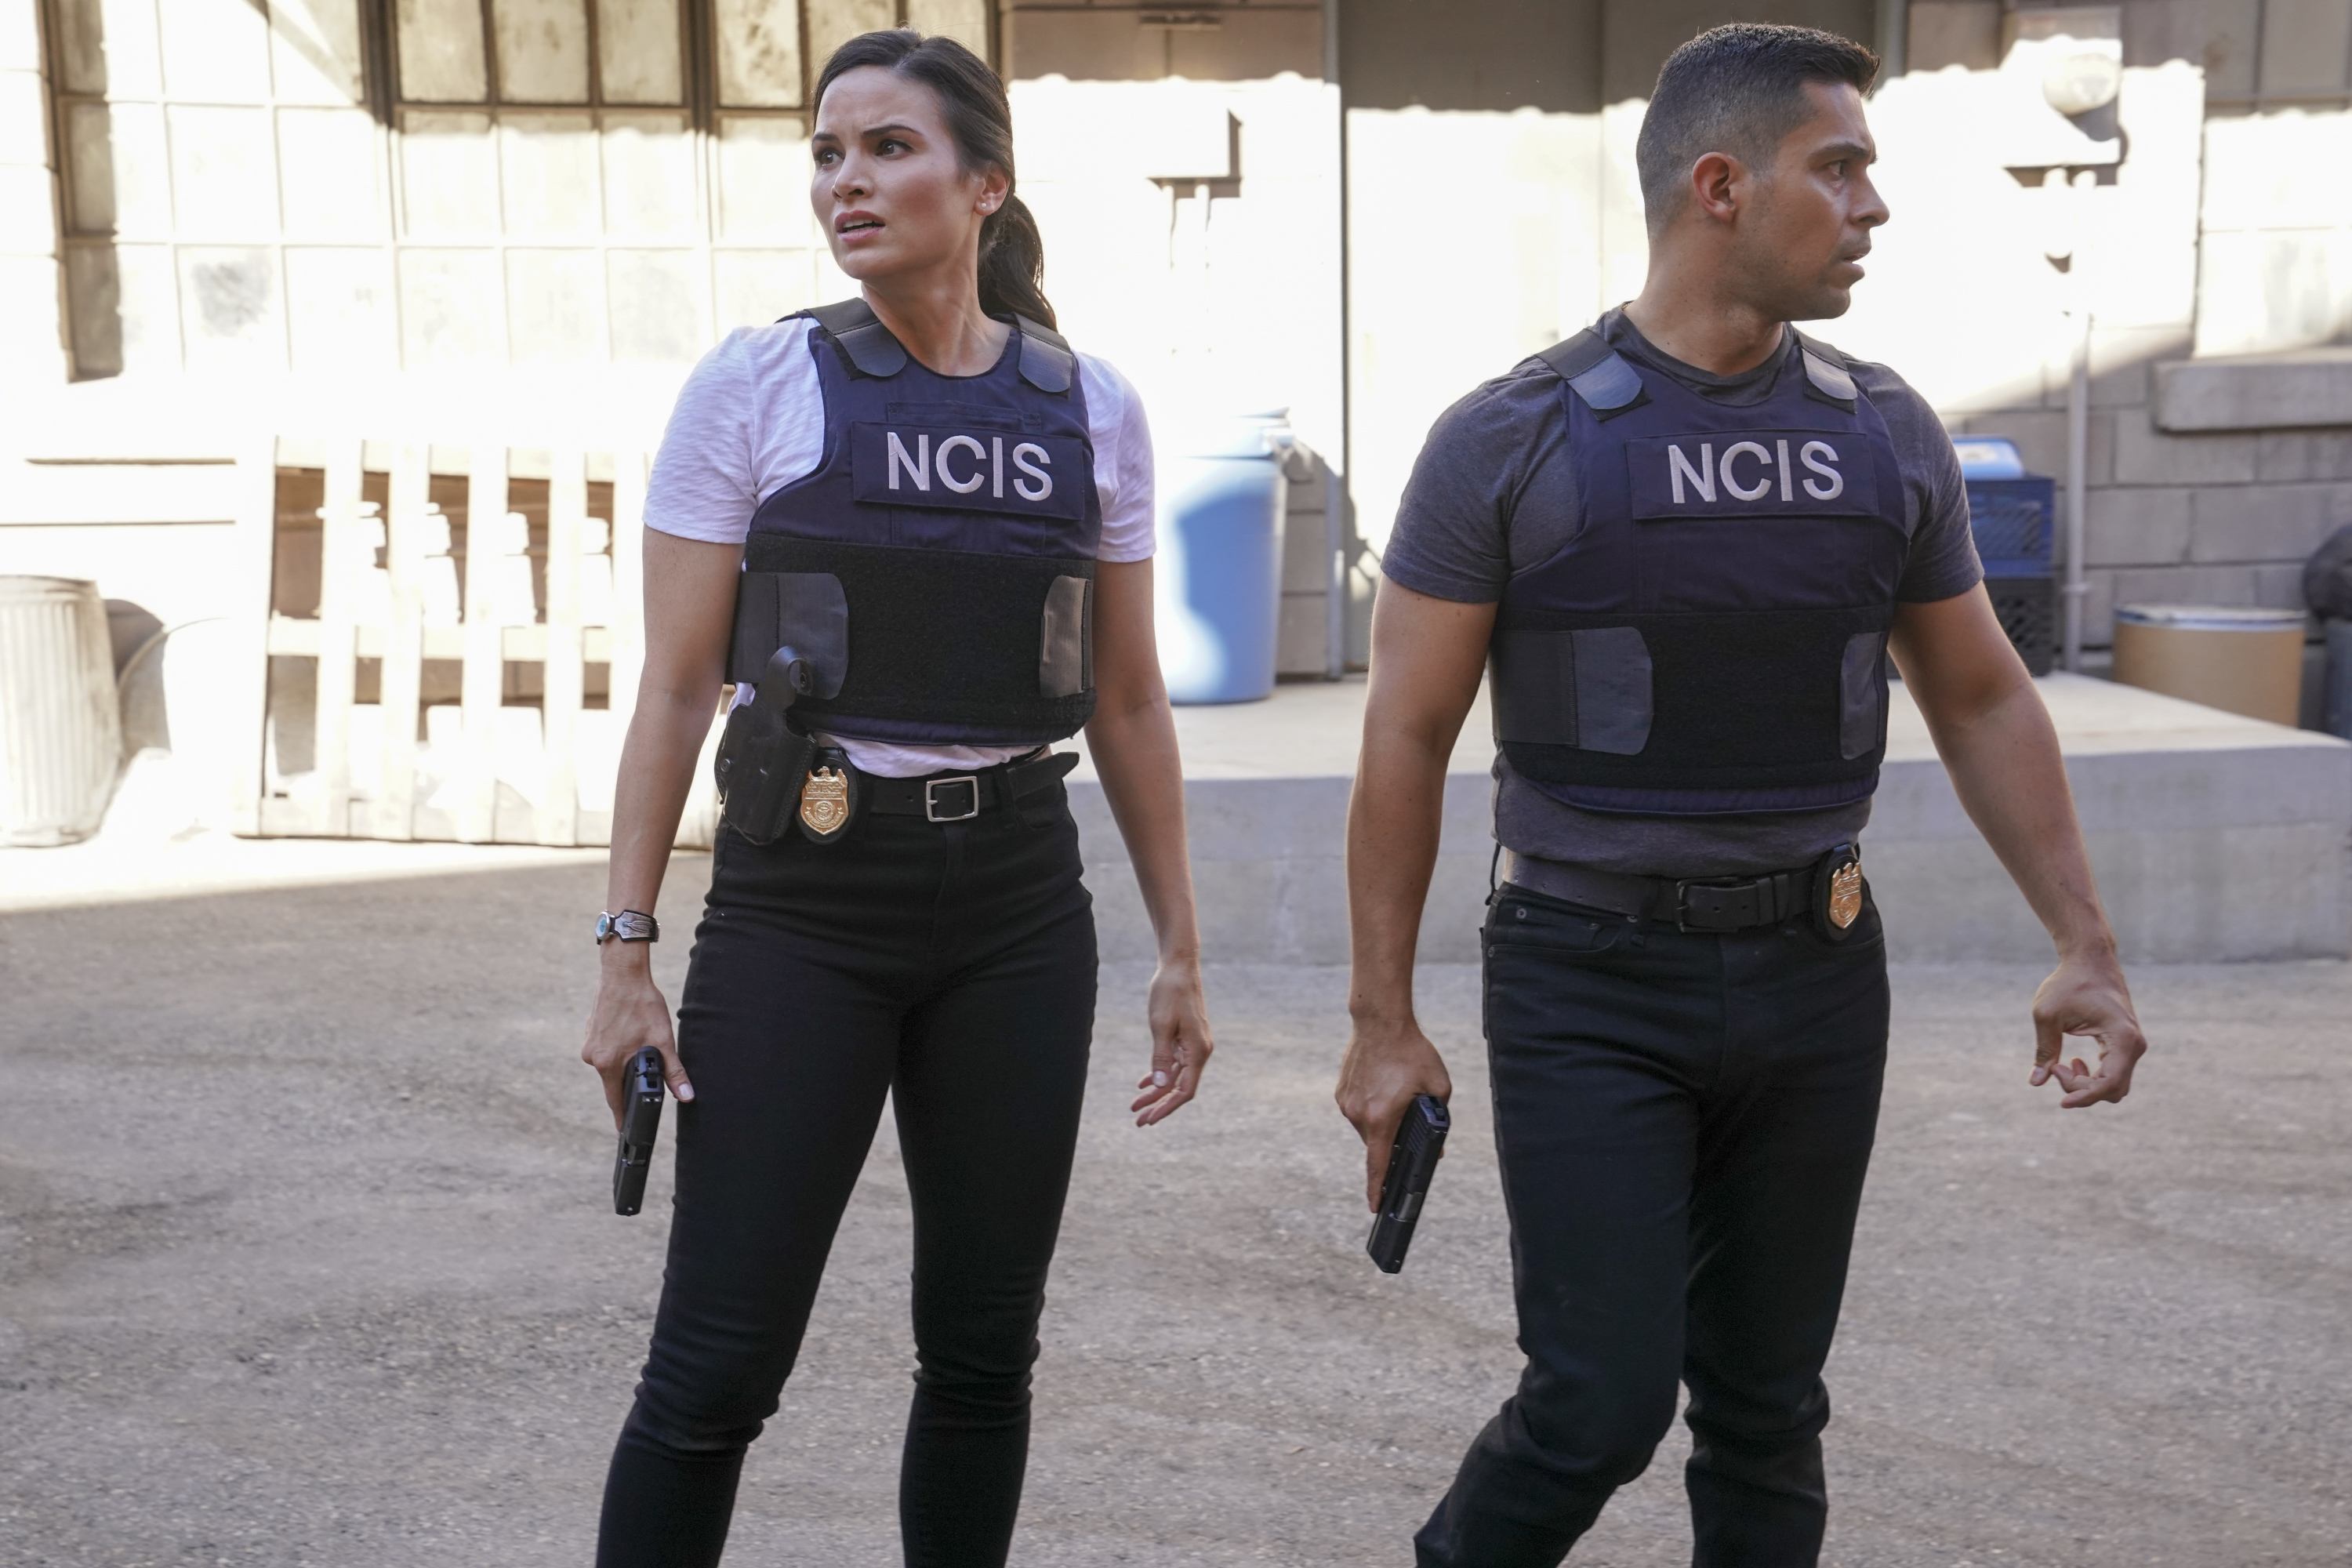 Katrina Law and Wilmer Valderrama play Agents Jessica Knight and Nick Torres on NCIS. 